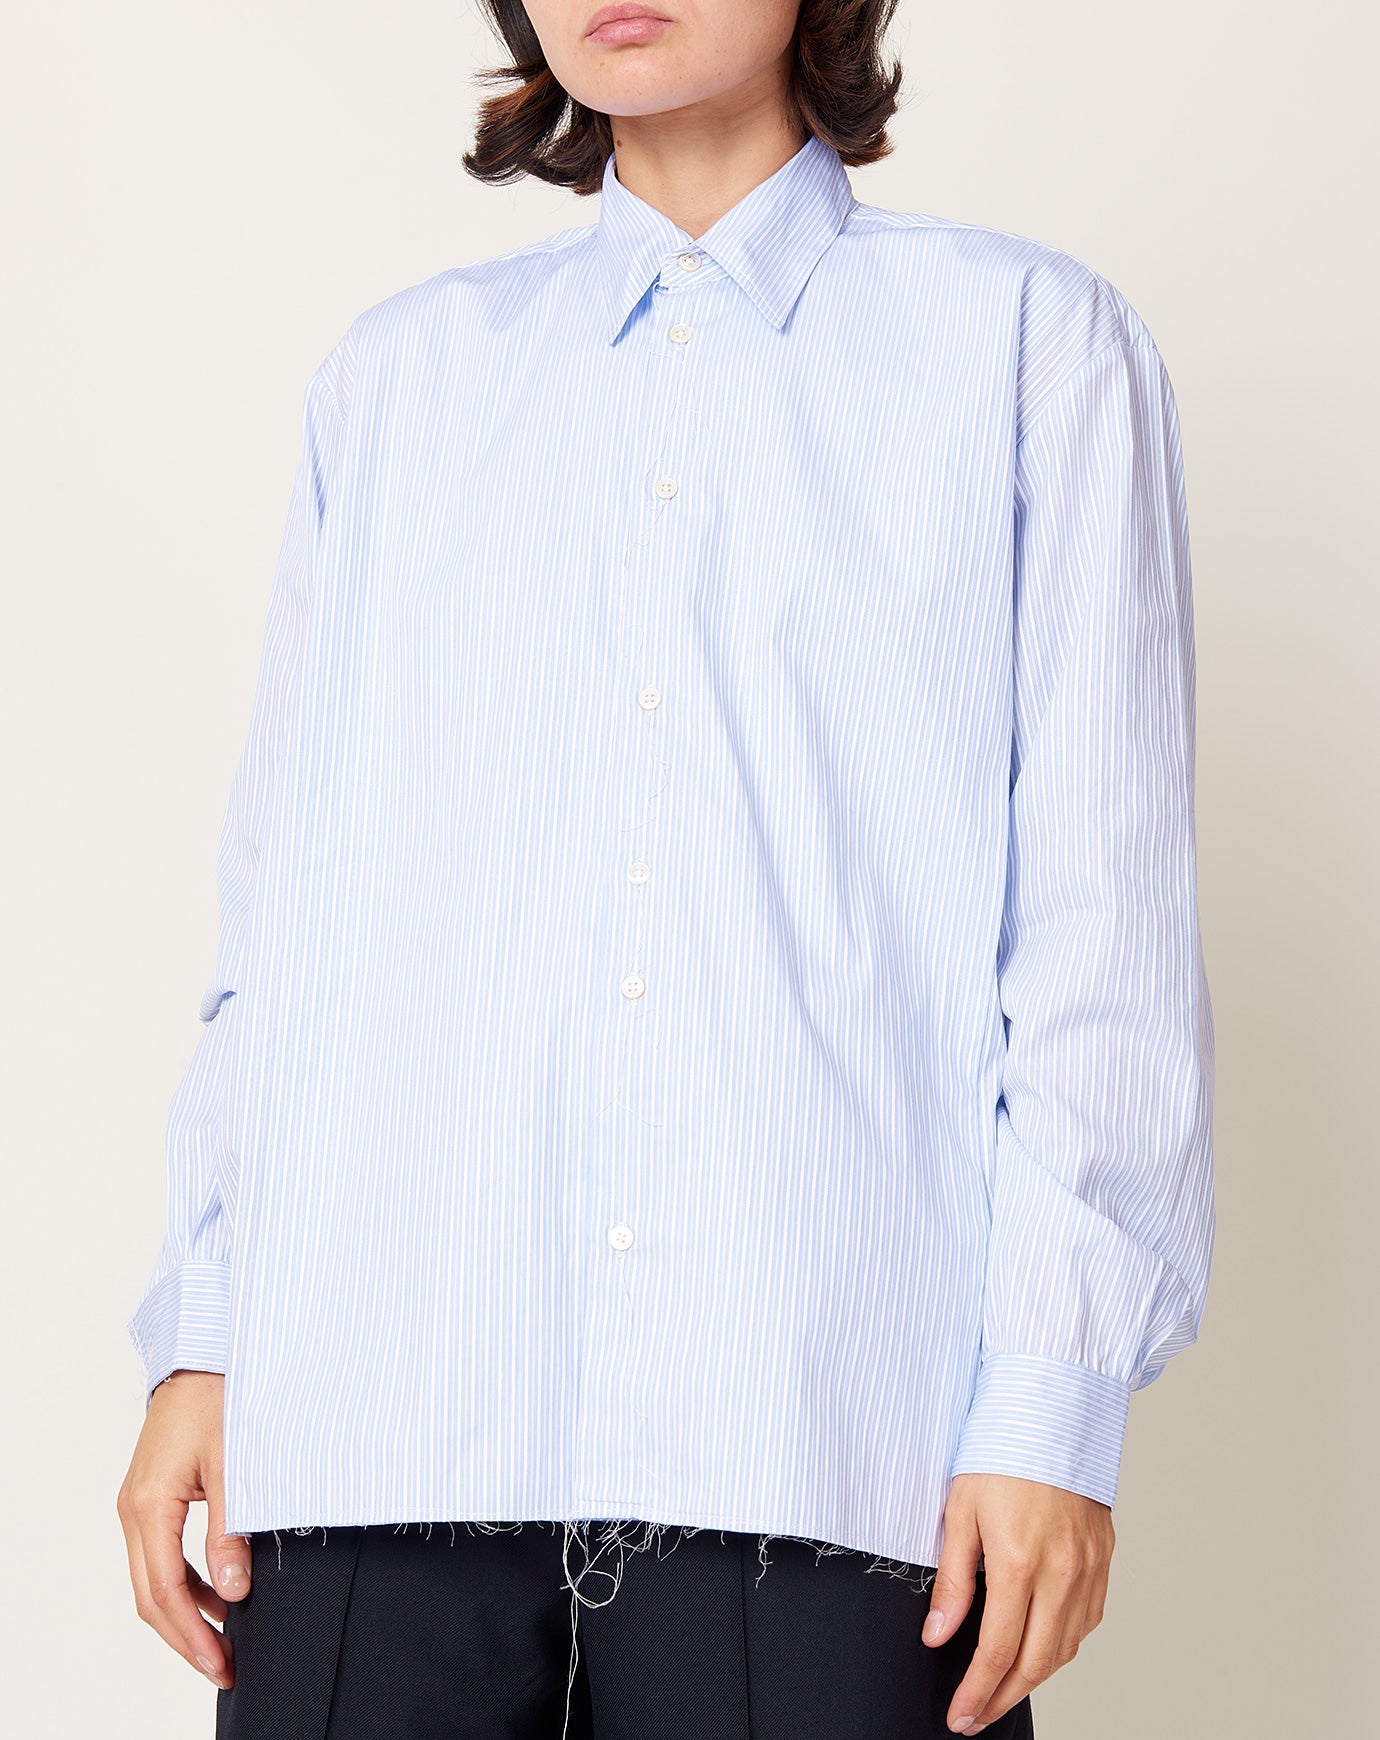 Camiel Fortgens Pocket Shirt in Blue and White Stripe